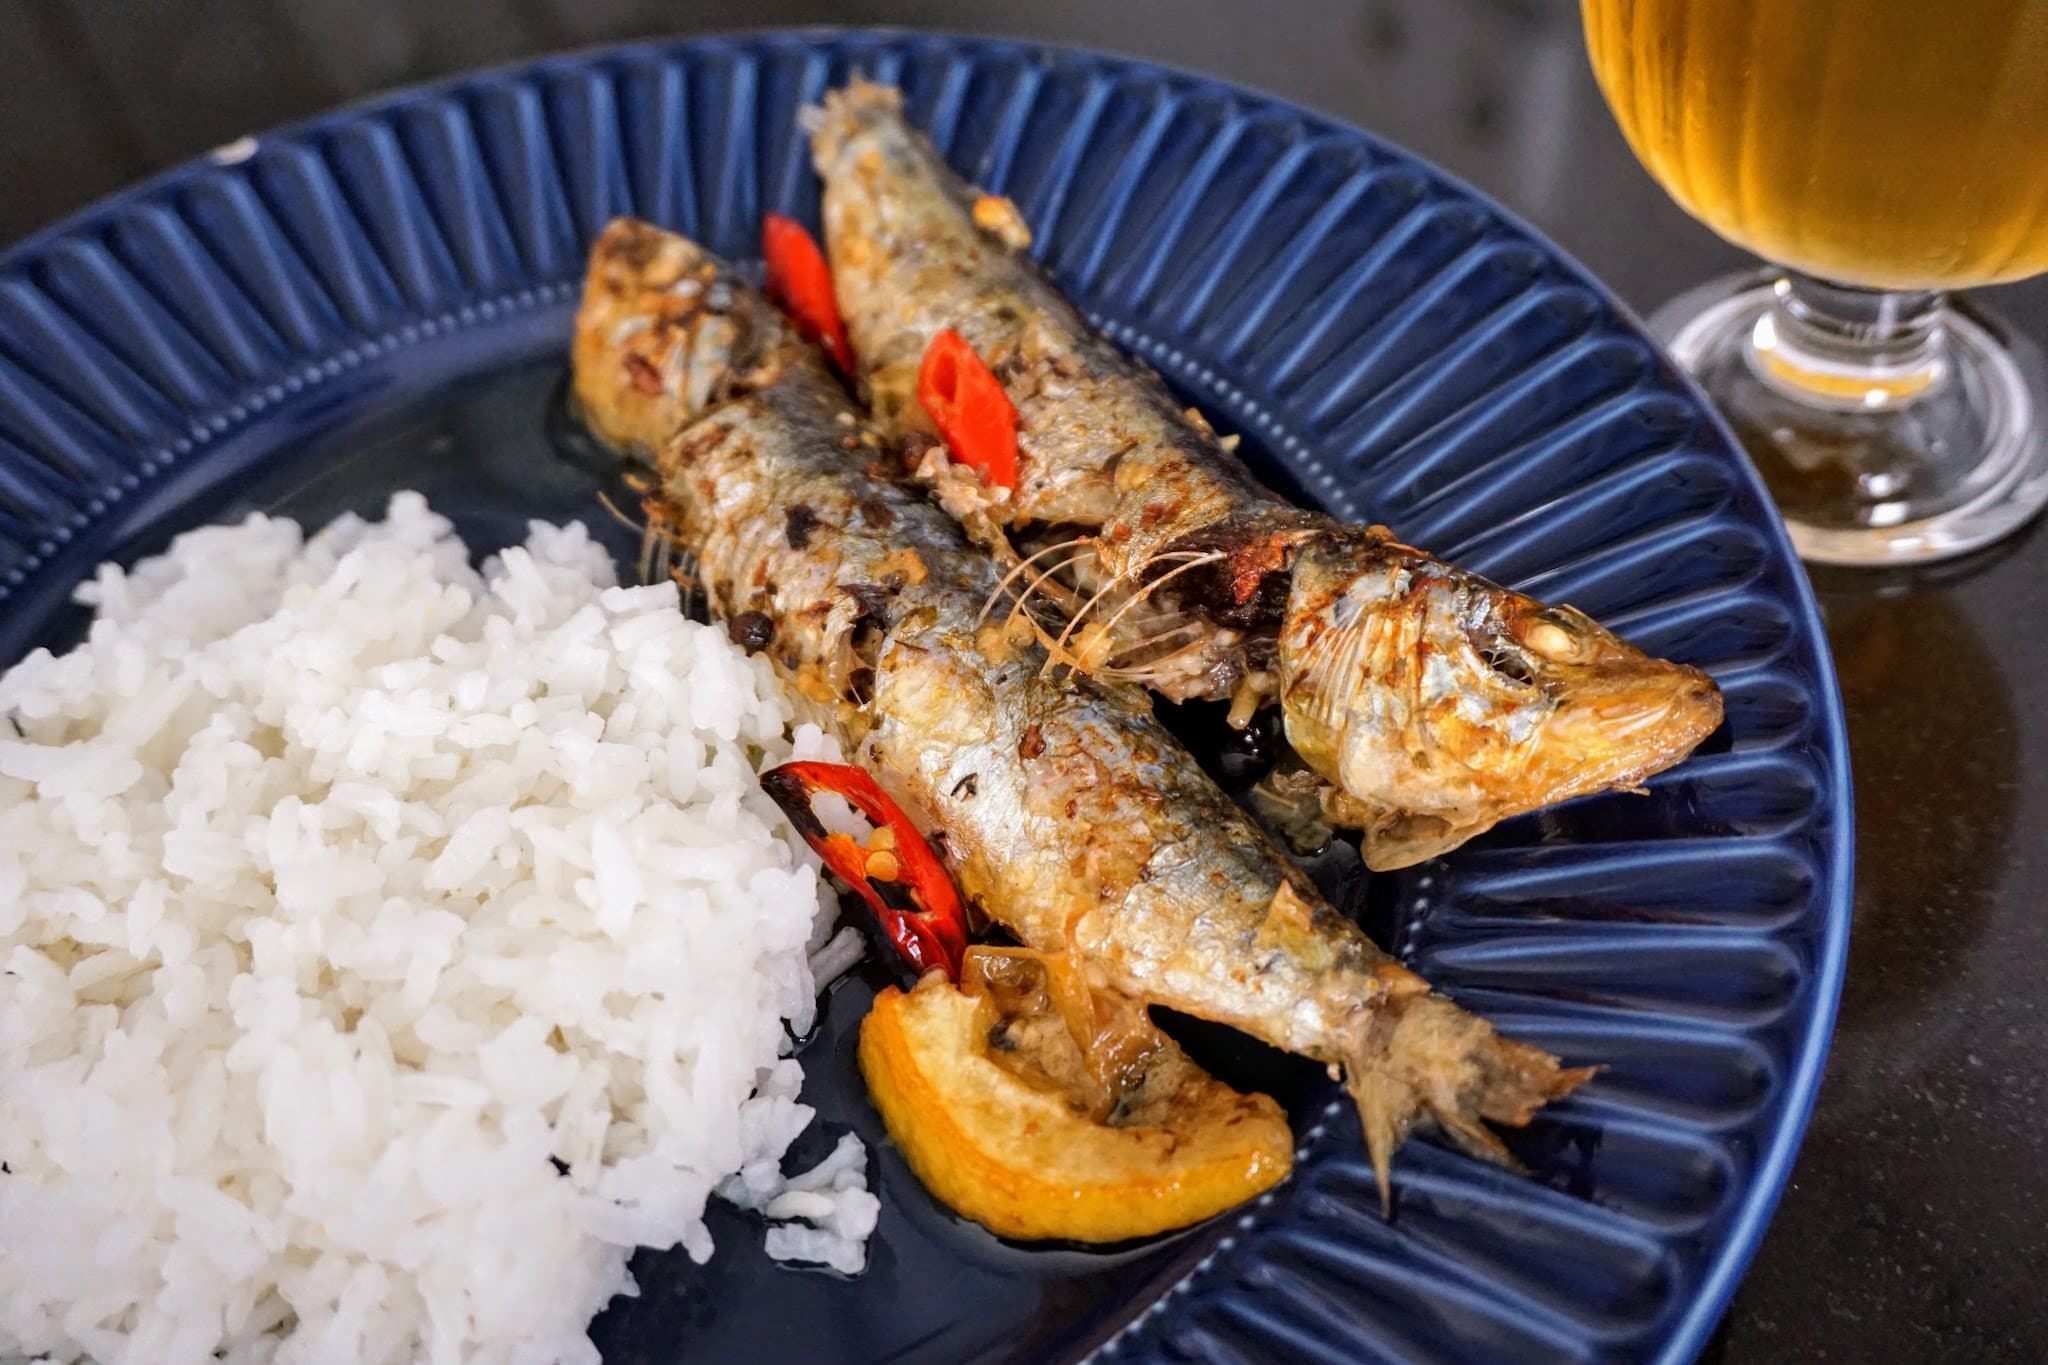 Oven-grilled sardines served on a plate with rice and beer at the side